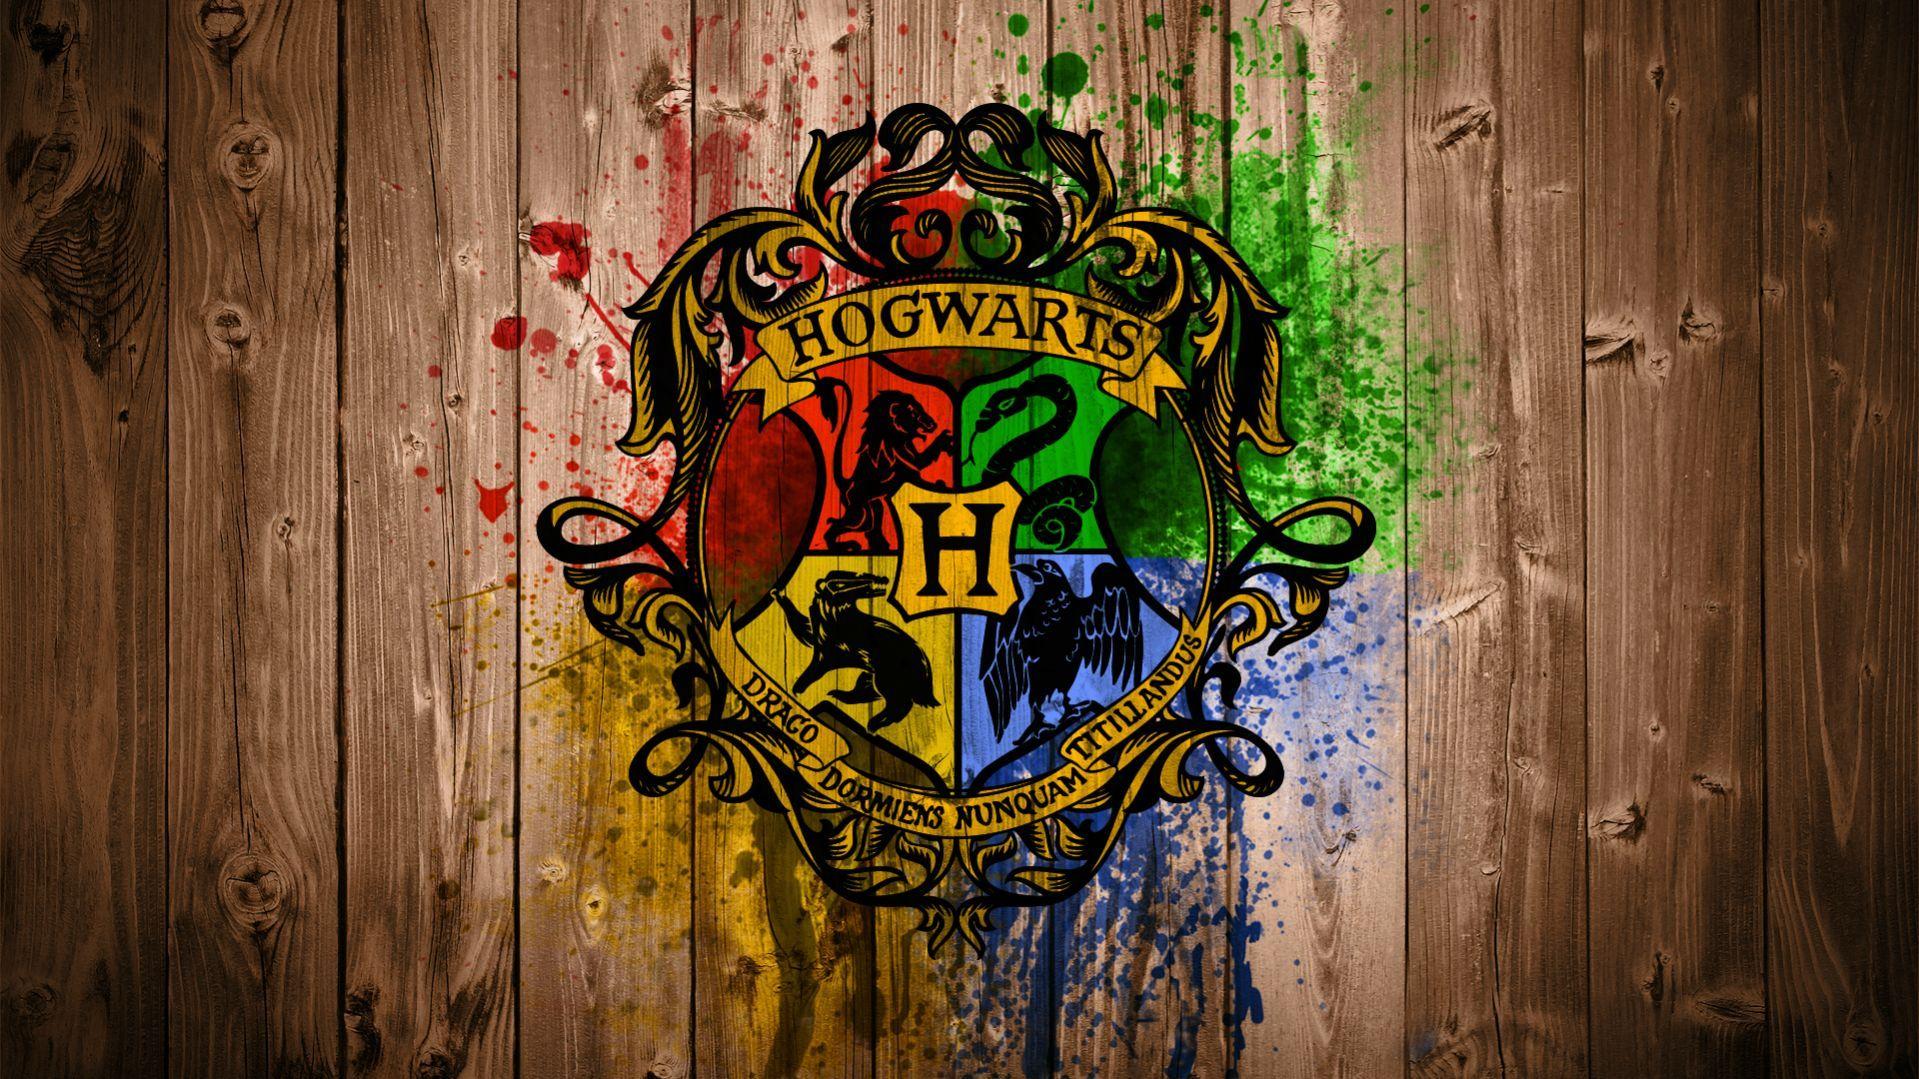 Hogwarts Castle Wallpaper High Quality Archived in movie Category